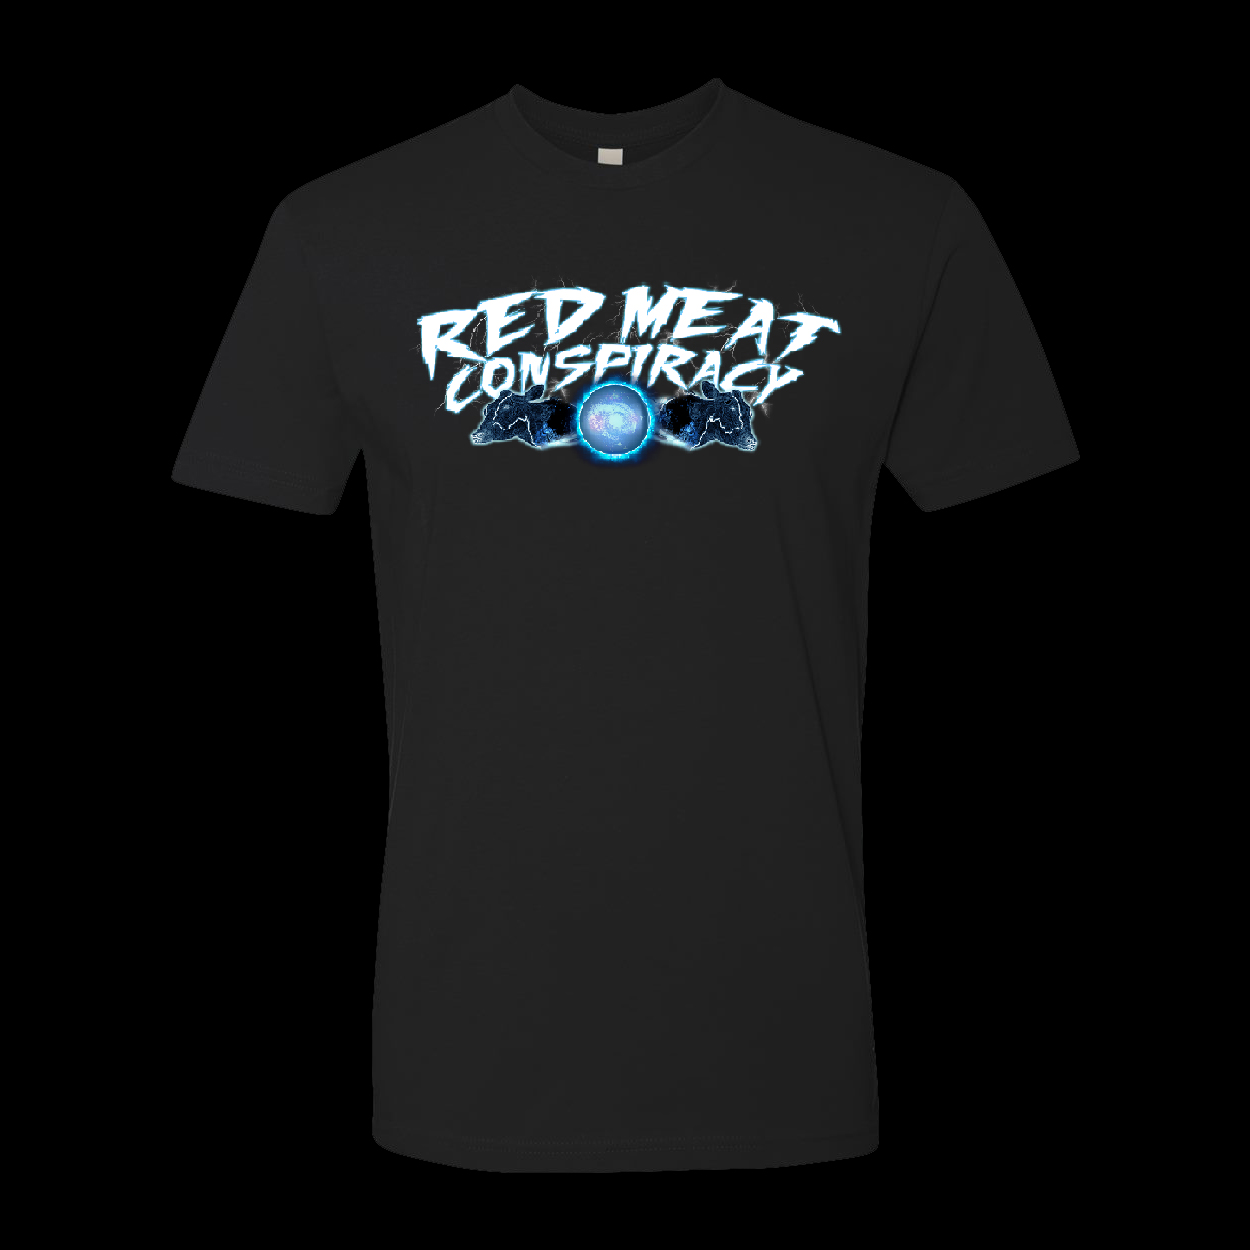 Red Meat Conspiracy midium T-shirt Black color